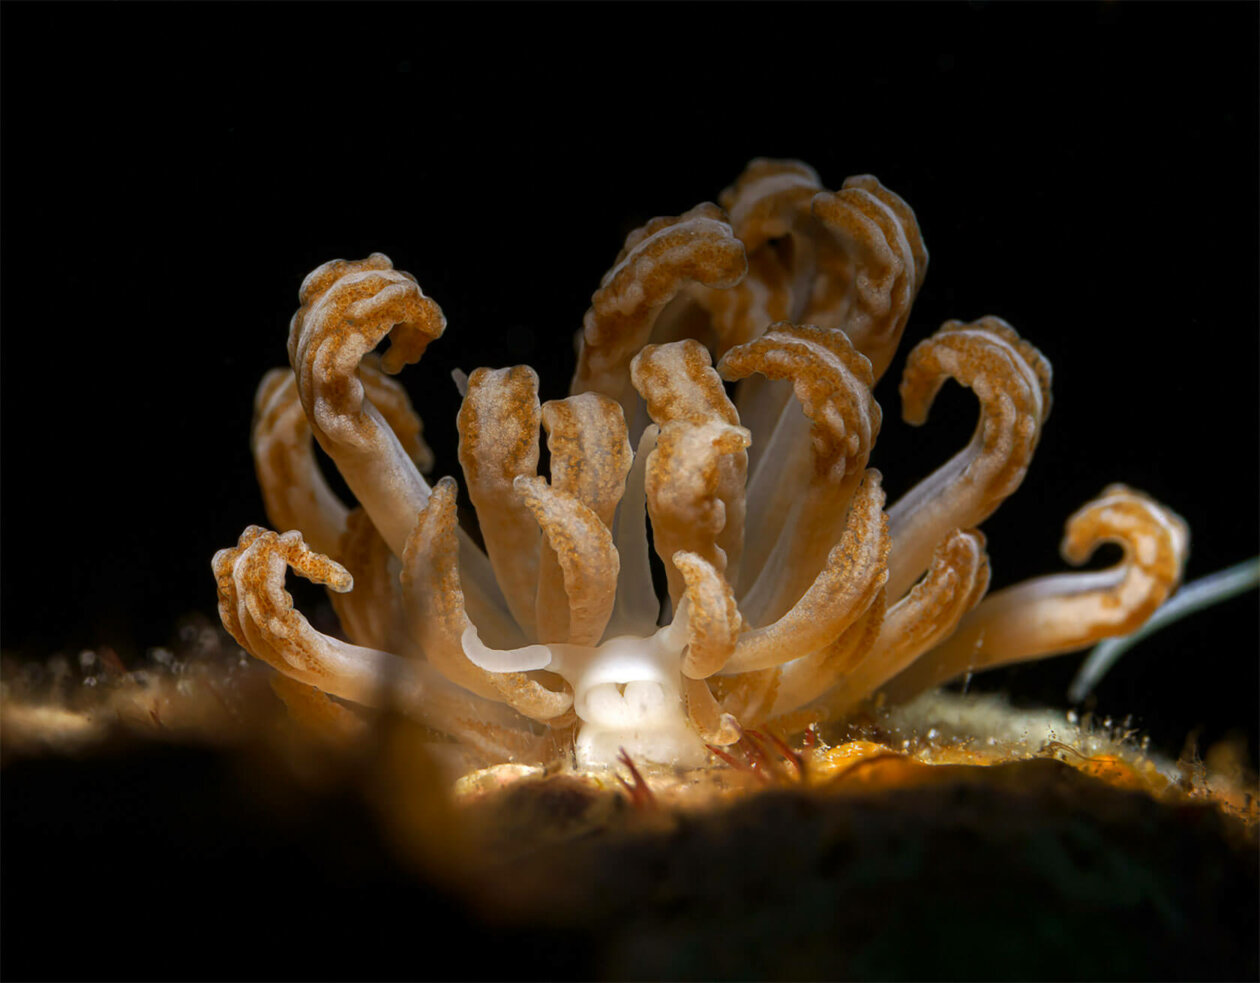 Nudibranchs Gorgeous Pictures Of Sea Slugs By Andrey Savin 13